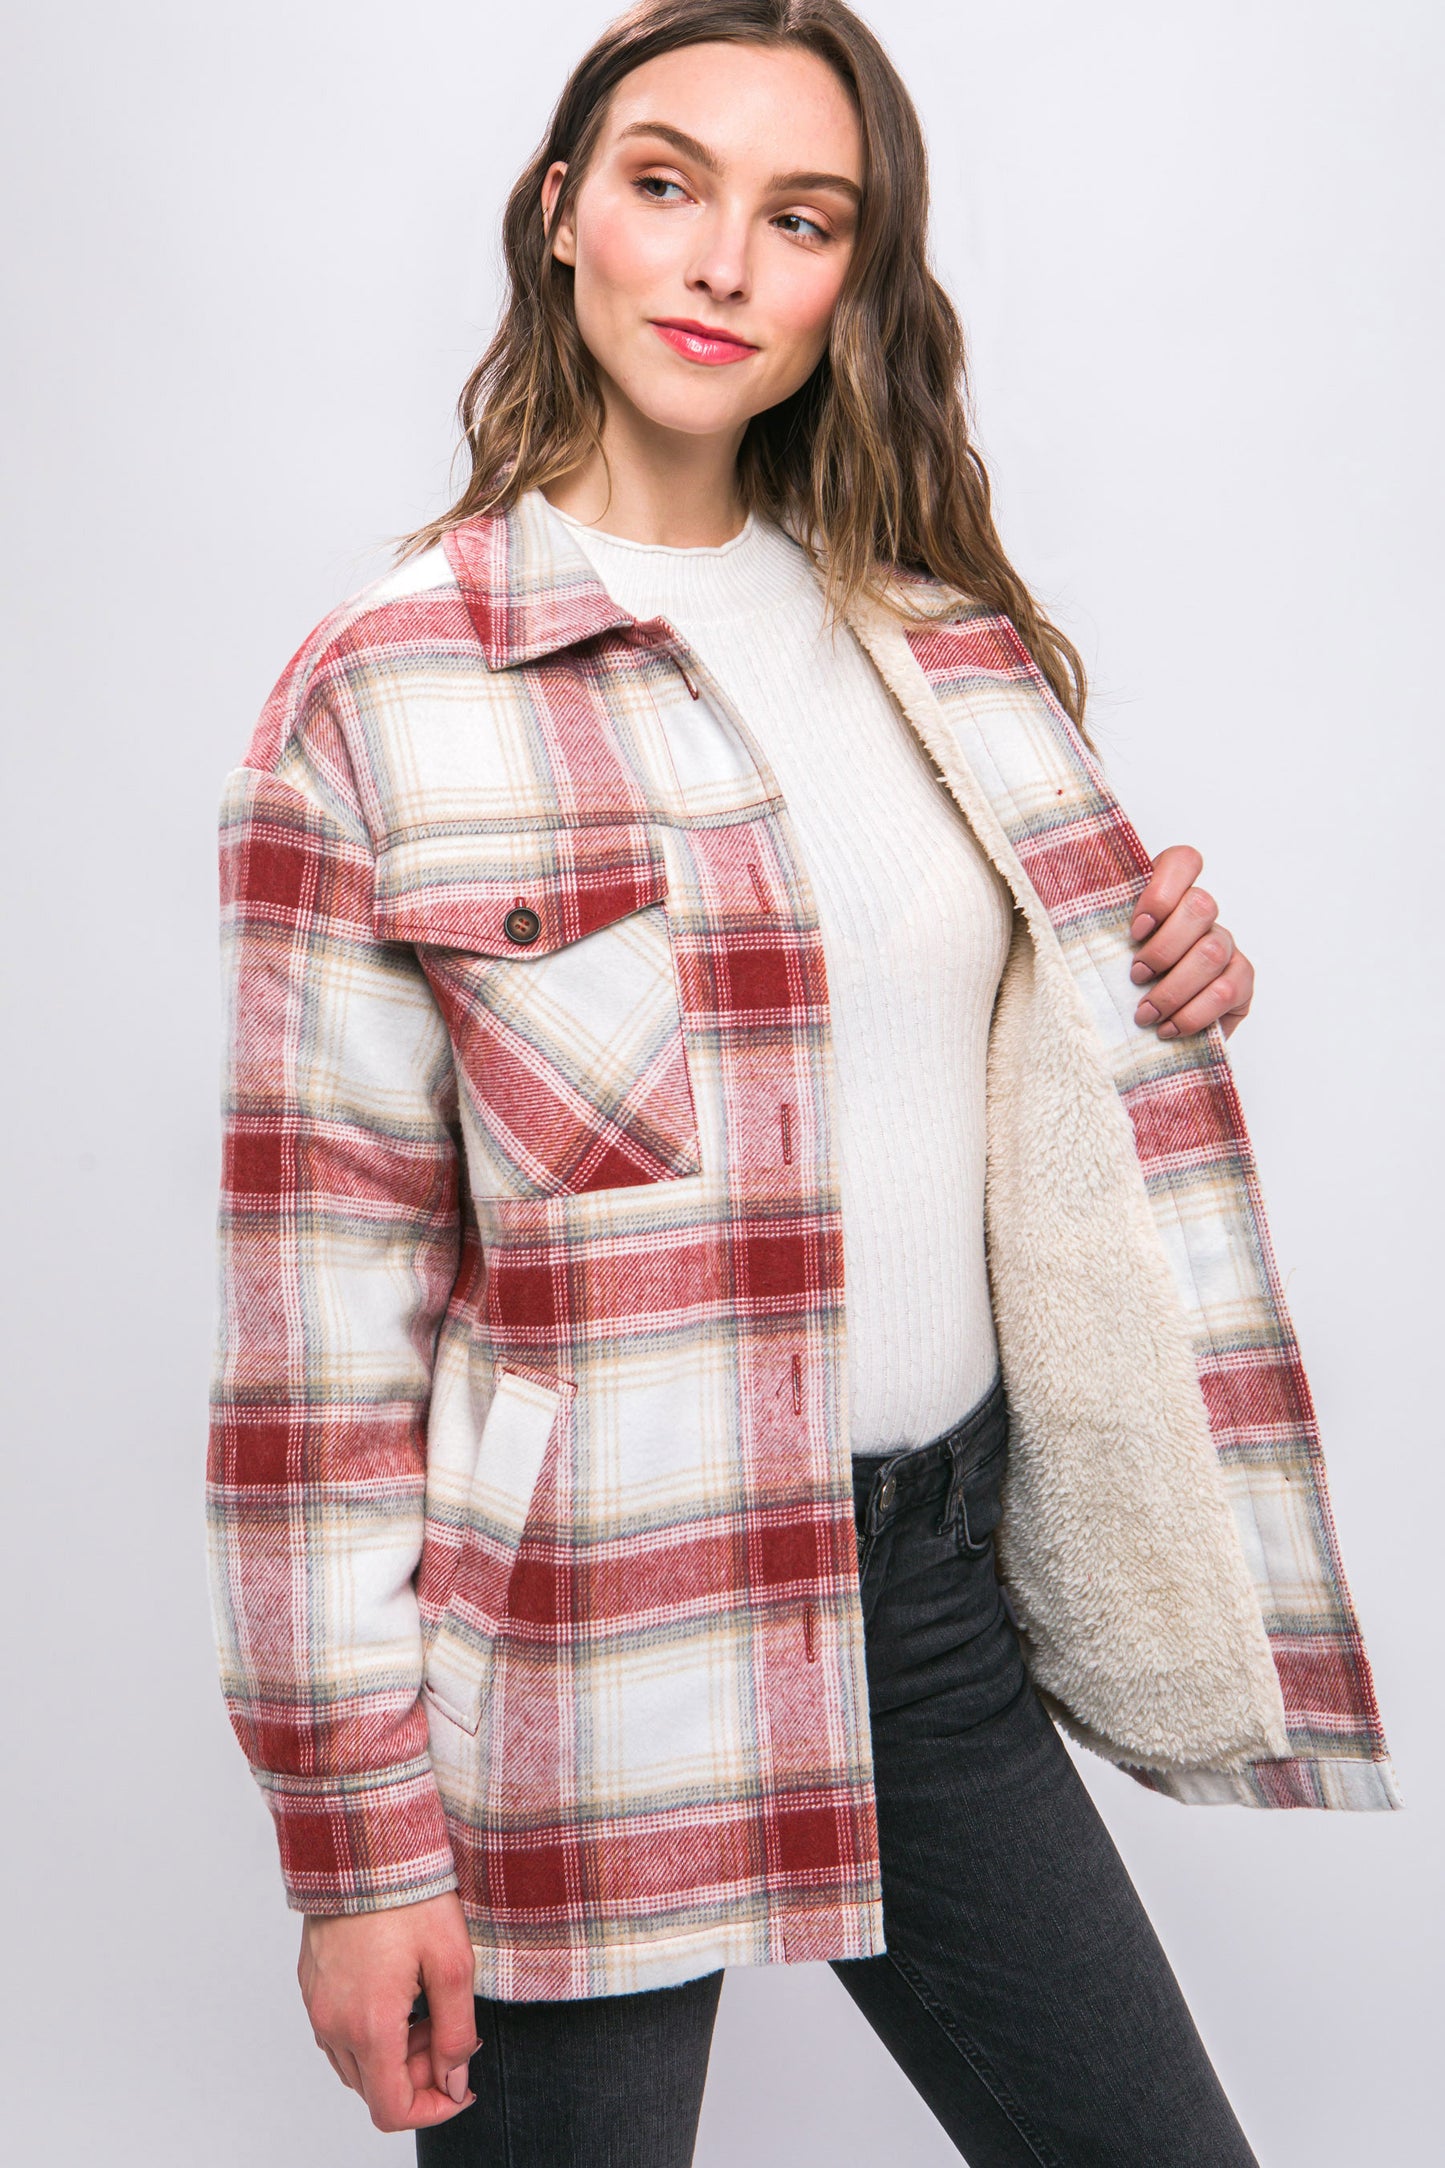 TERRA COTTA-Plaid Button Up Jacket with Sherpa Lining